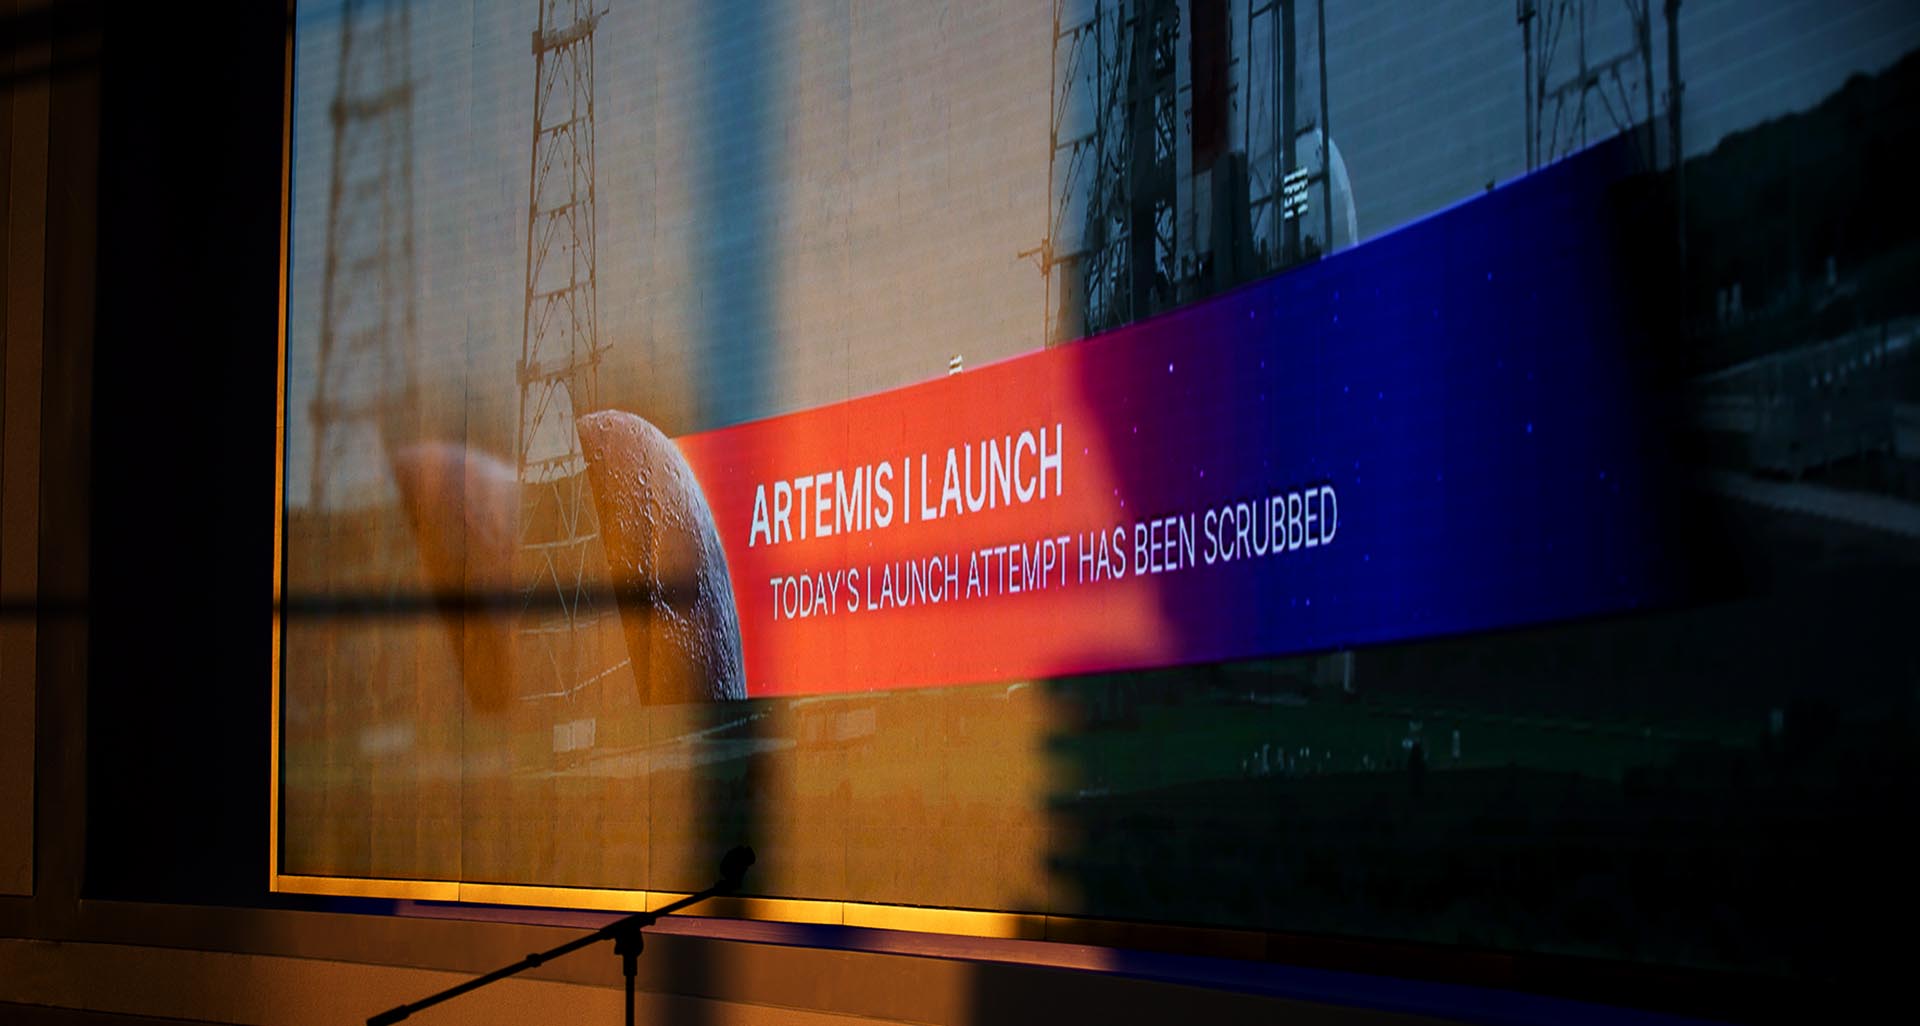 The Artemis I launch was postponed Monday morning at Kennedy Space Center due to engine issues.